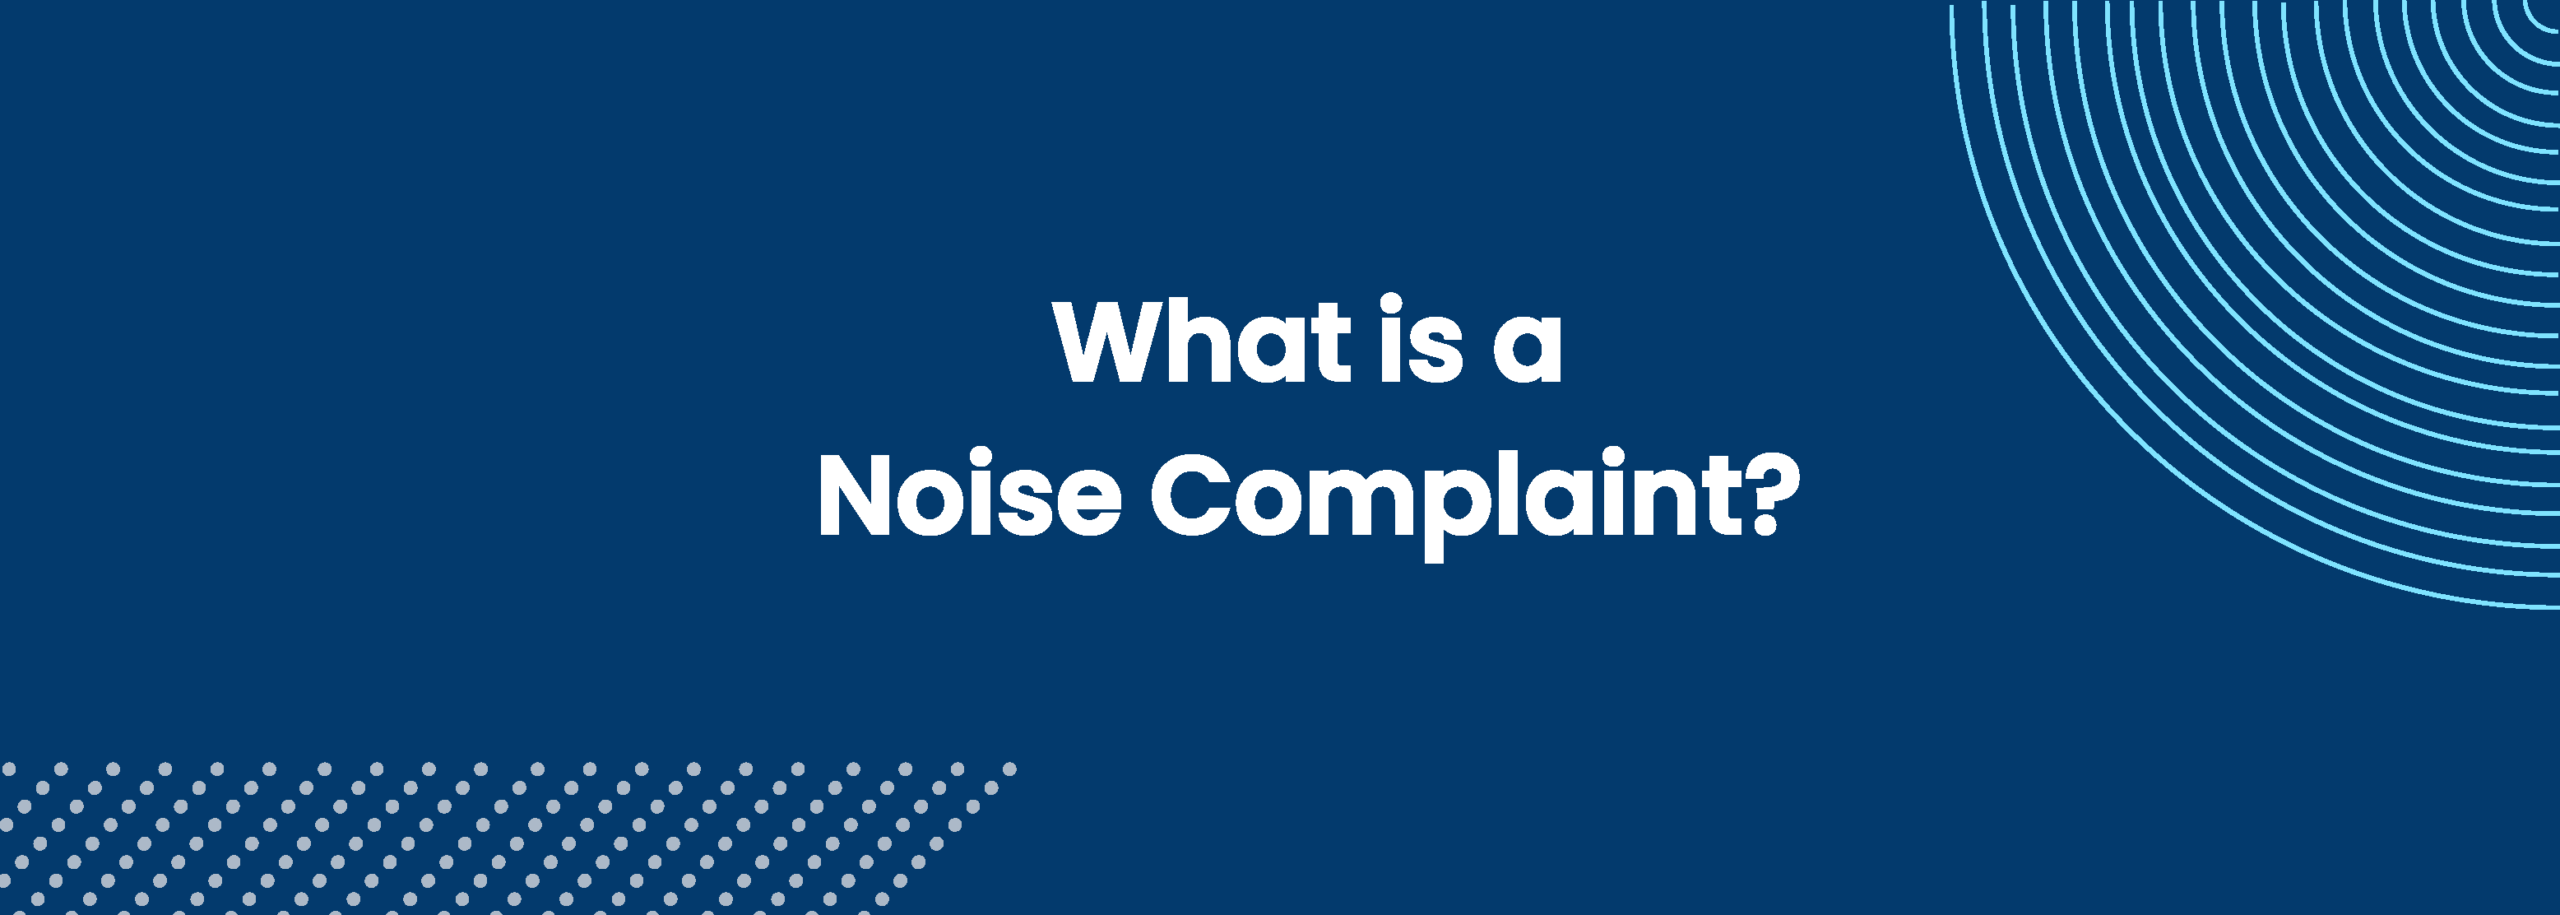 A noise complaint is a written or verbal complaint made against a person or group that's causing excessive noise.